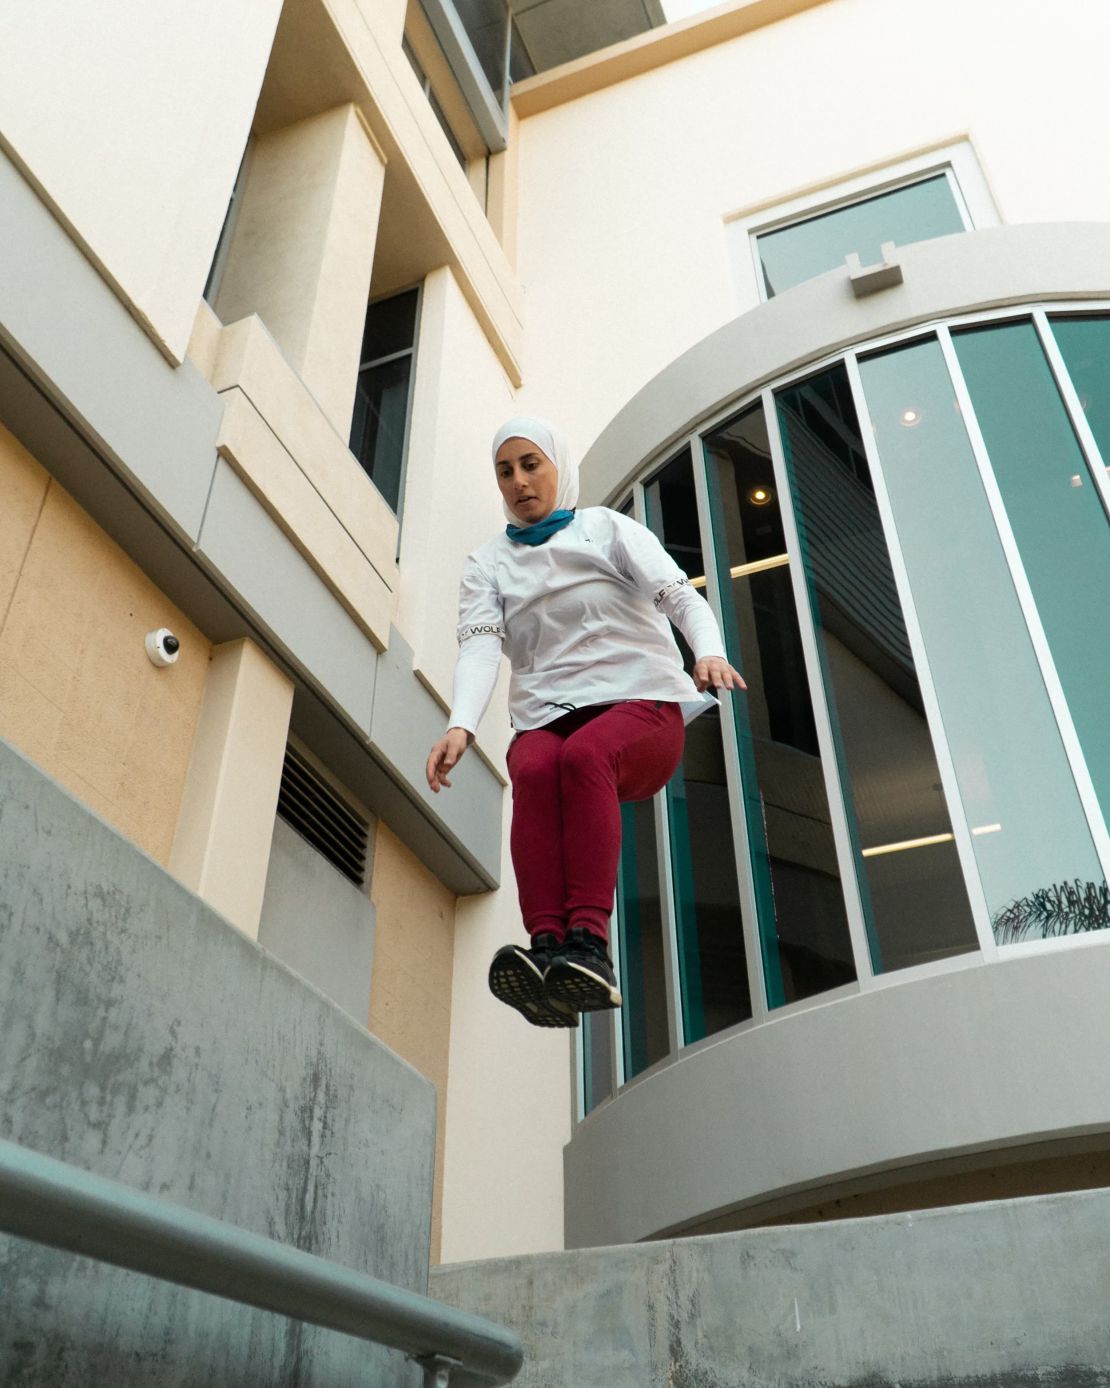 Having grown up playing sports, Los Angeles native Sara Mudallal began practicing parkour when she was 20.  